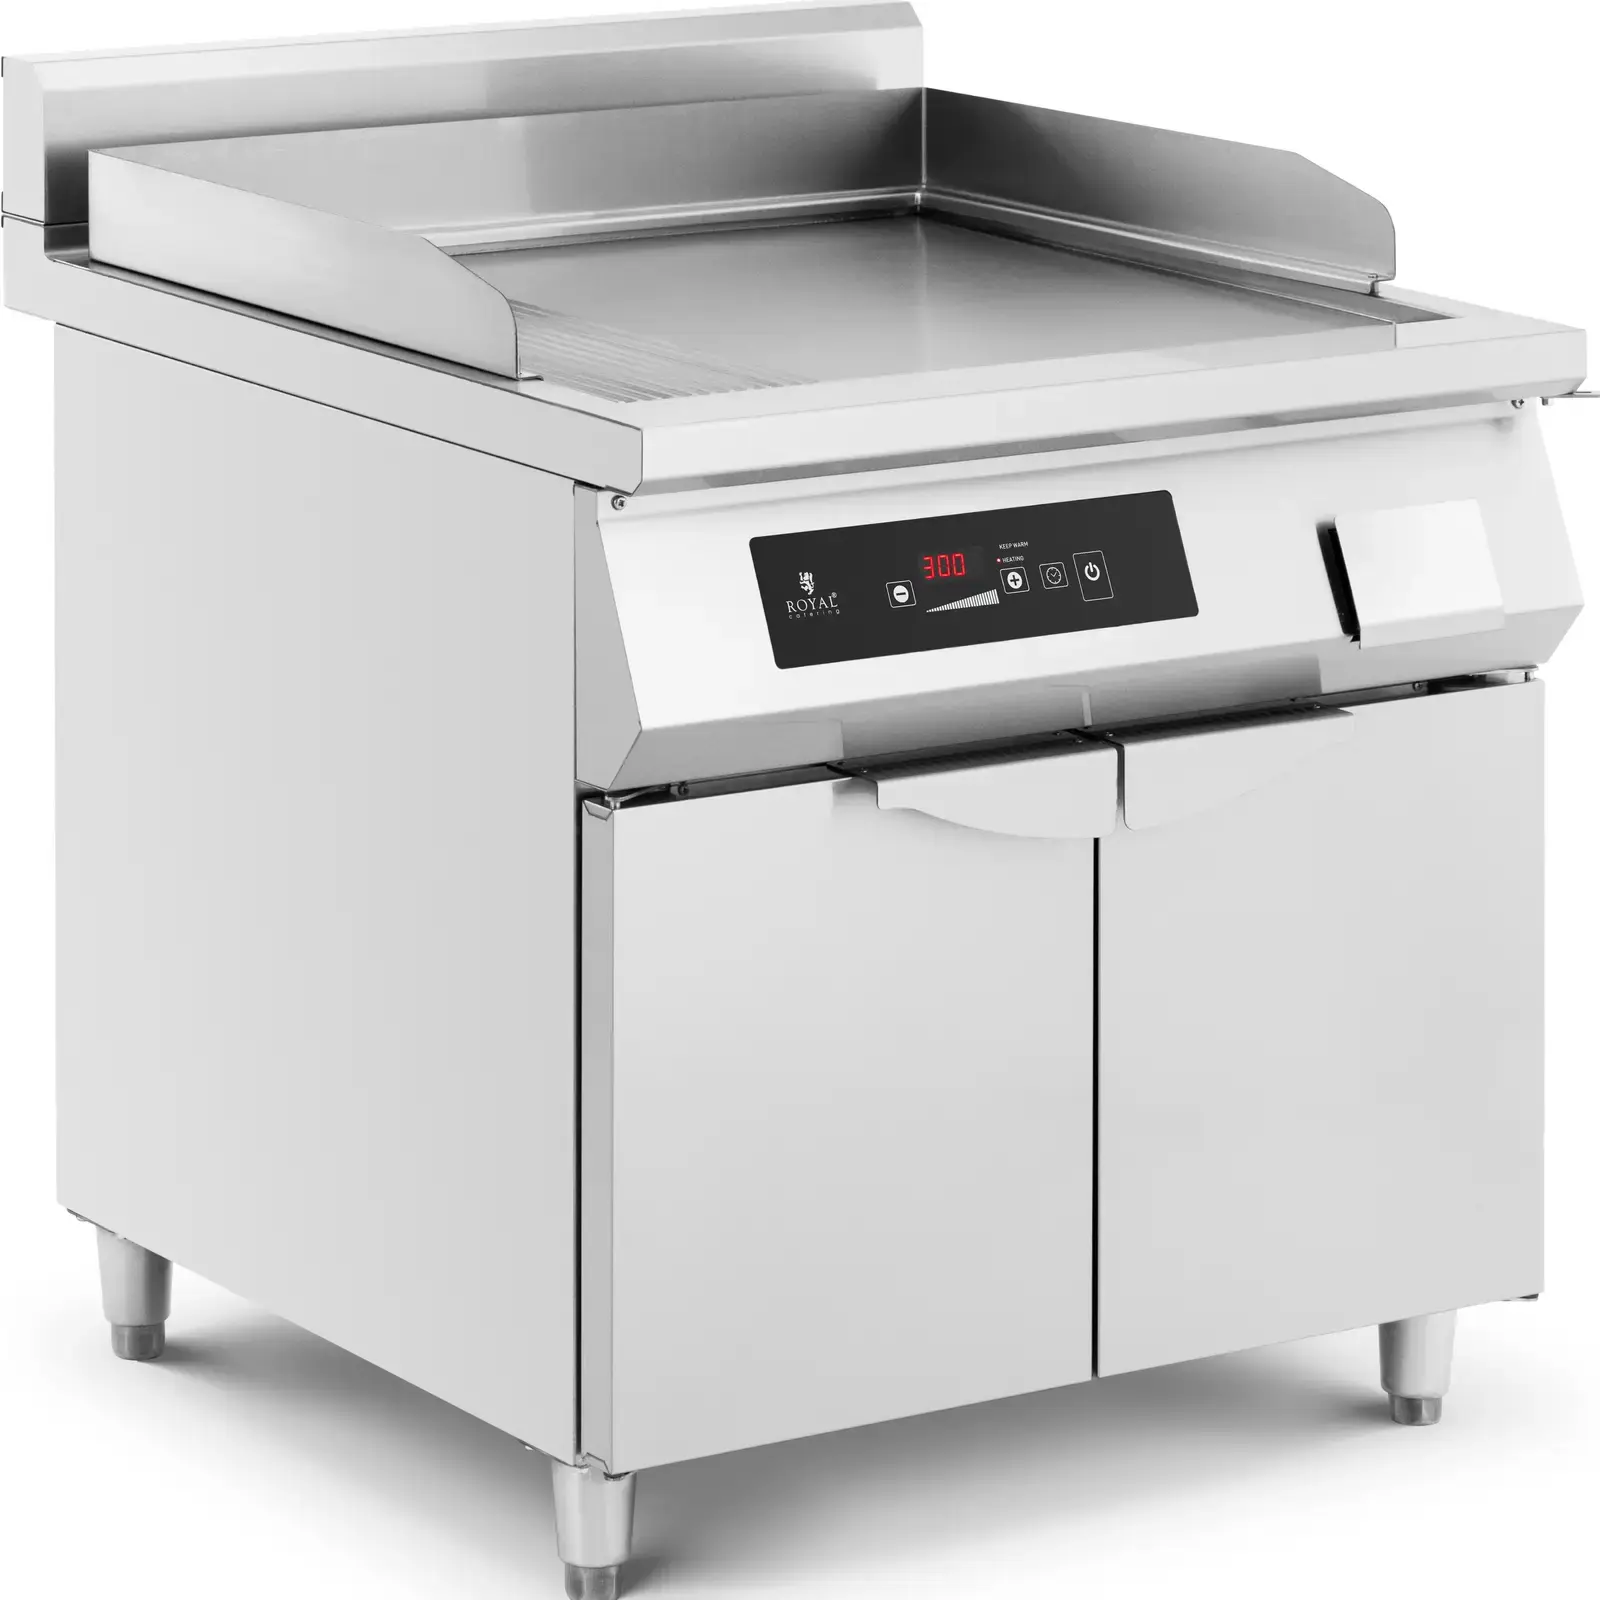 Royal Catering Inductiegrill - 720 x 610 mm - glad - 10000 W - Royal Catering